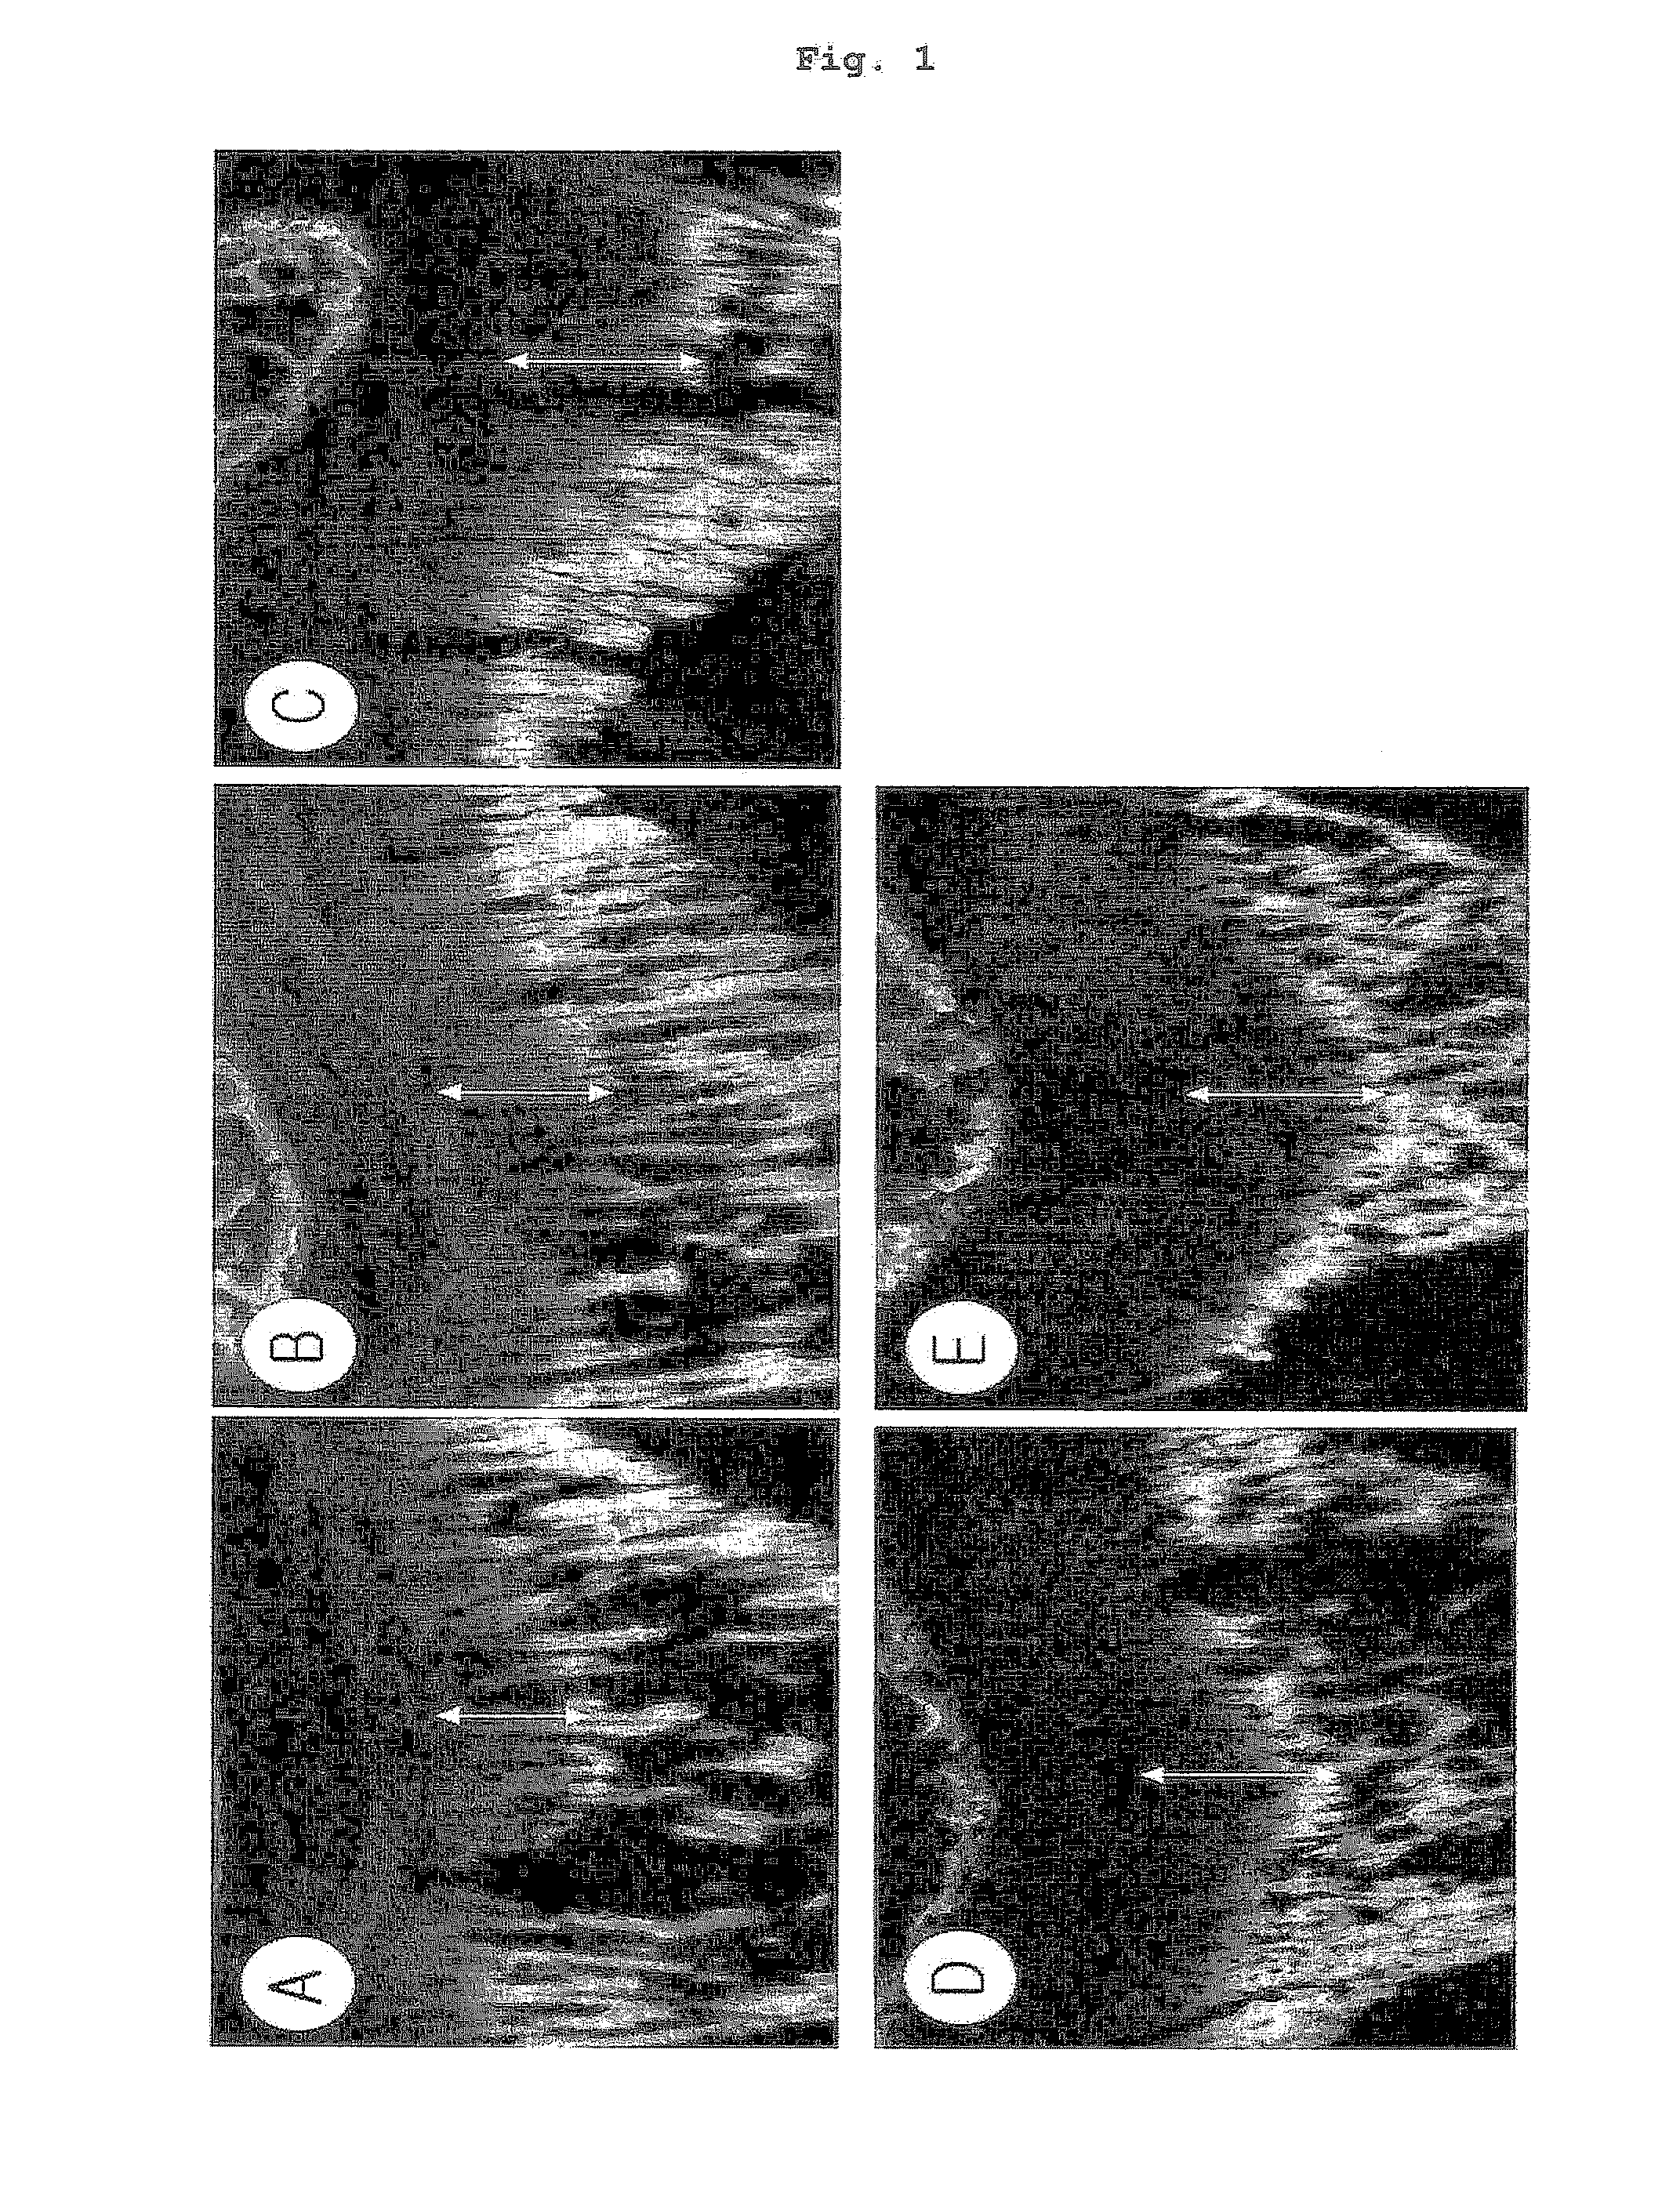 Composition comprising the extract of crude drug complex for stimulating bone growth